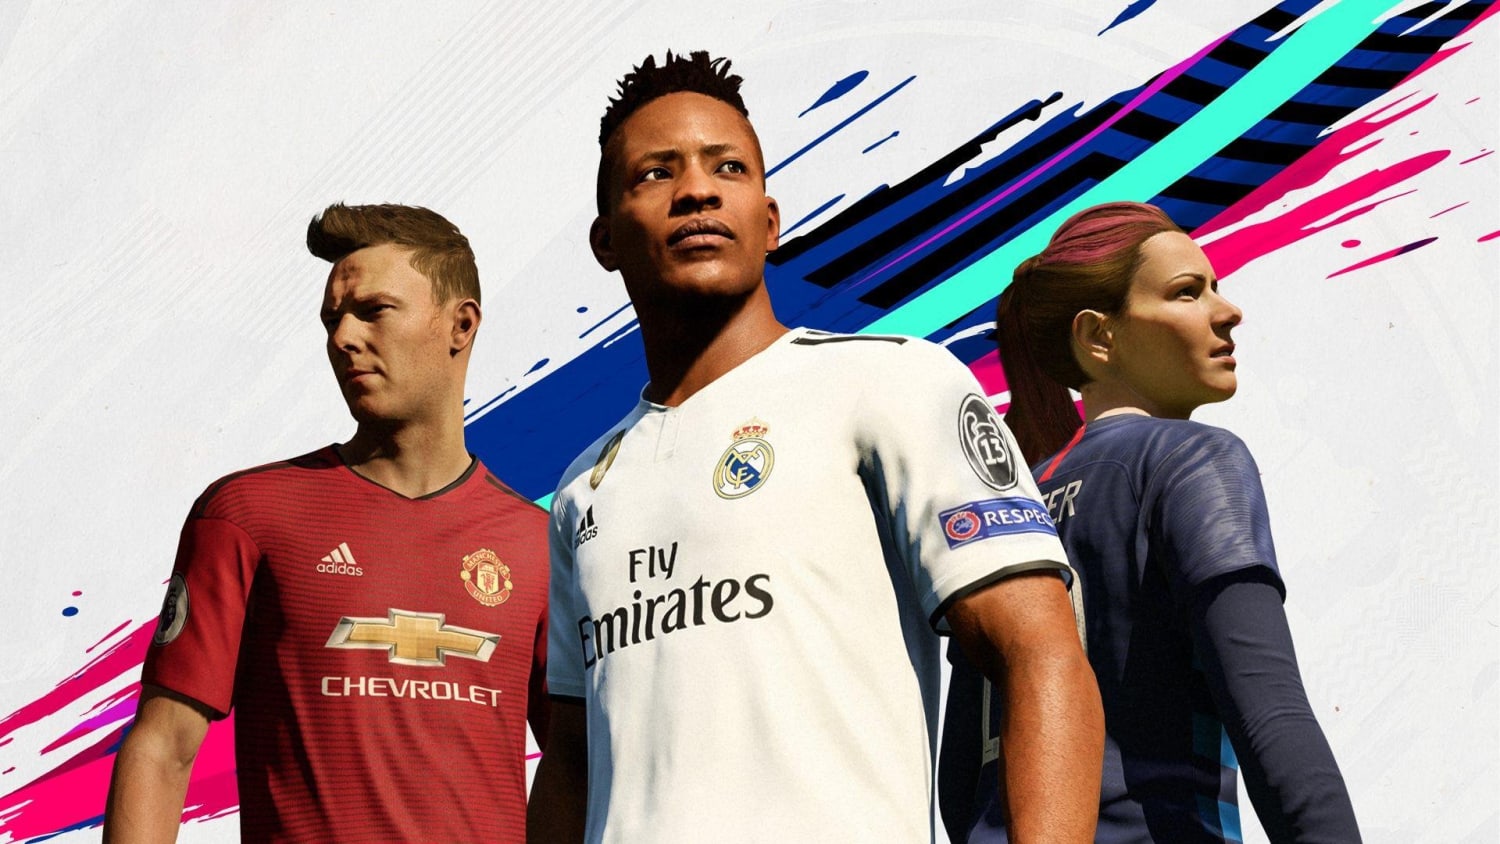 FIFA 19 The Journey: 10 to achieve success